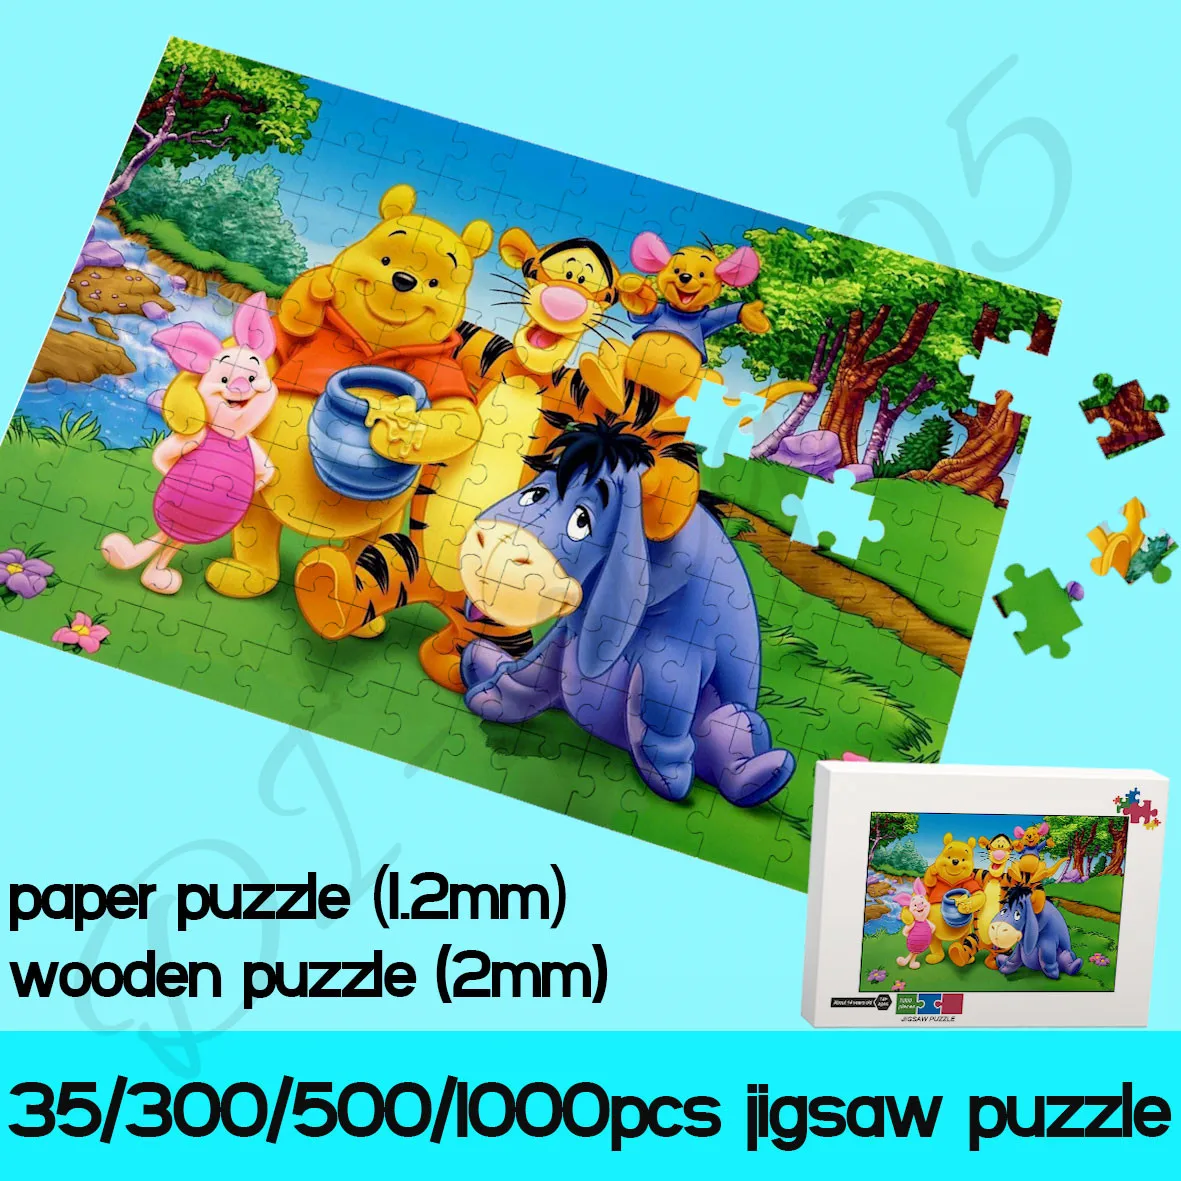 35/300/500/1000 Piece Paper and Wooden Puzzles Disney Cartoon Characters Picture Jigsaw Puzzles Decompress Educational Toys bristlegrass wooden jigsaw puzzles 500 1000 piece yidam tibetan buddhist art thangka painting educational toy collectibles decor